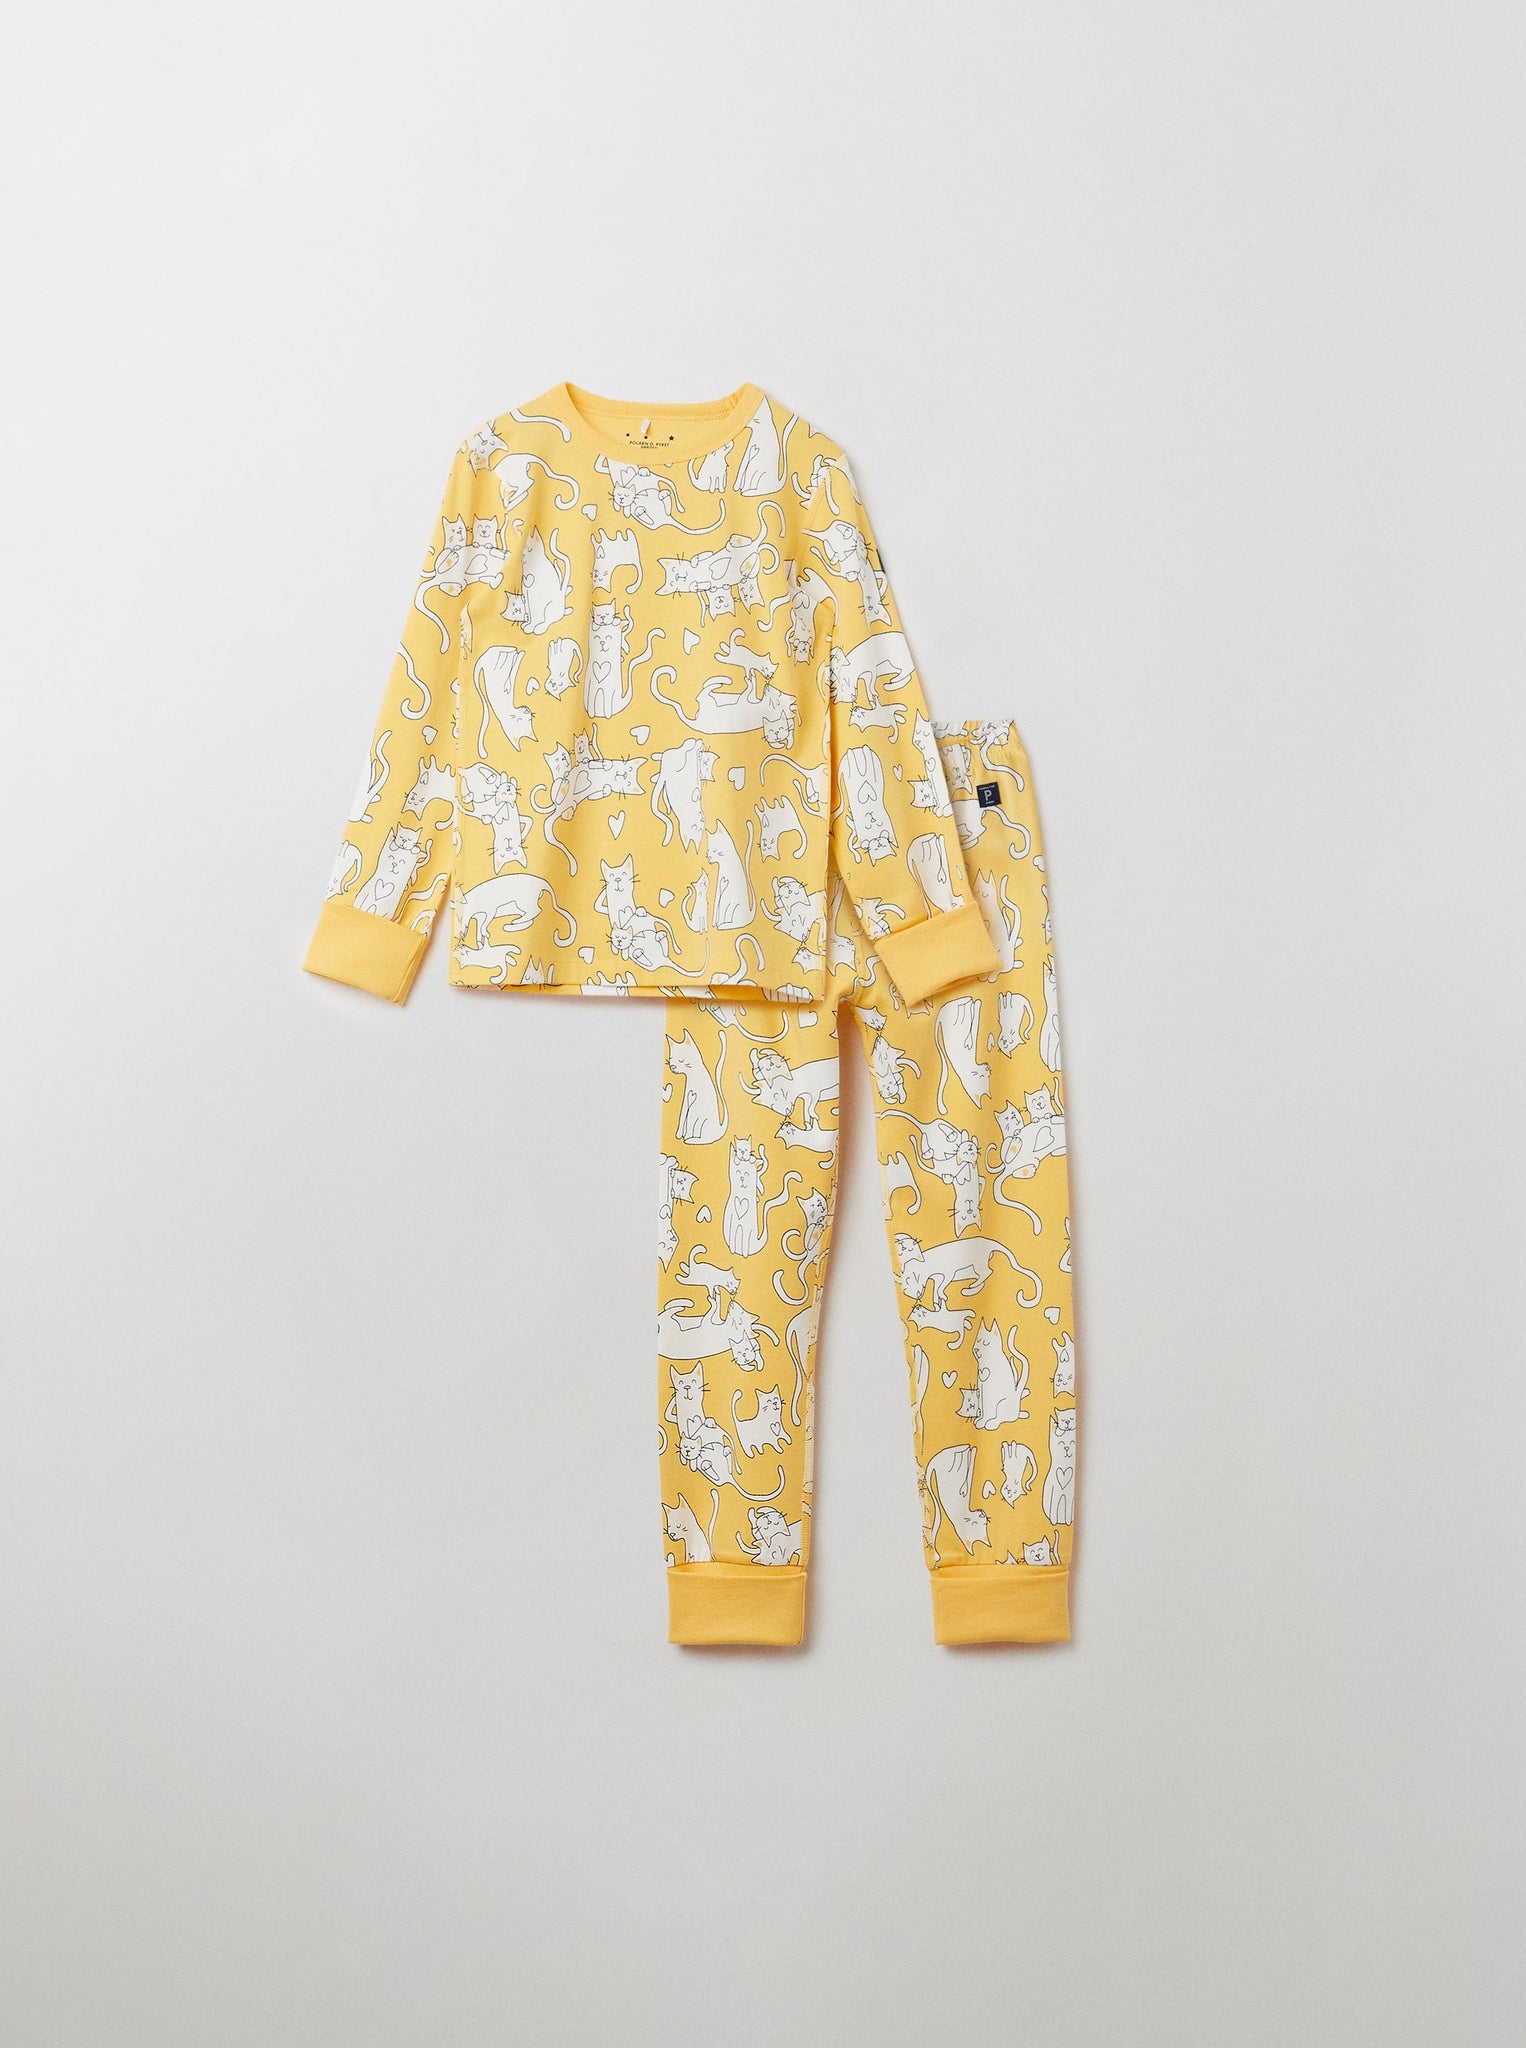 Organic Cotton Floral Kids Pyjamas from the Polarn O. Pyret kidswear collection. Ethically produced kids clothing.